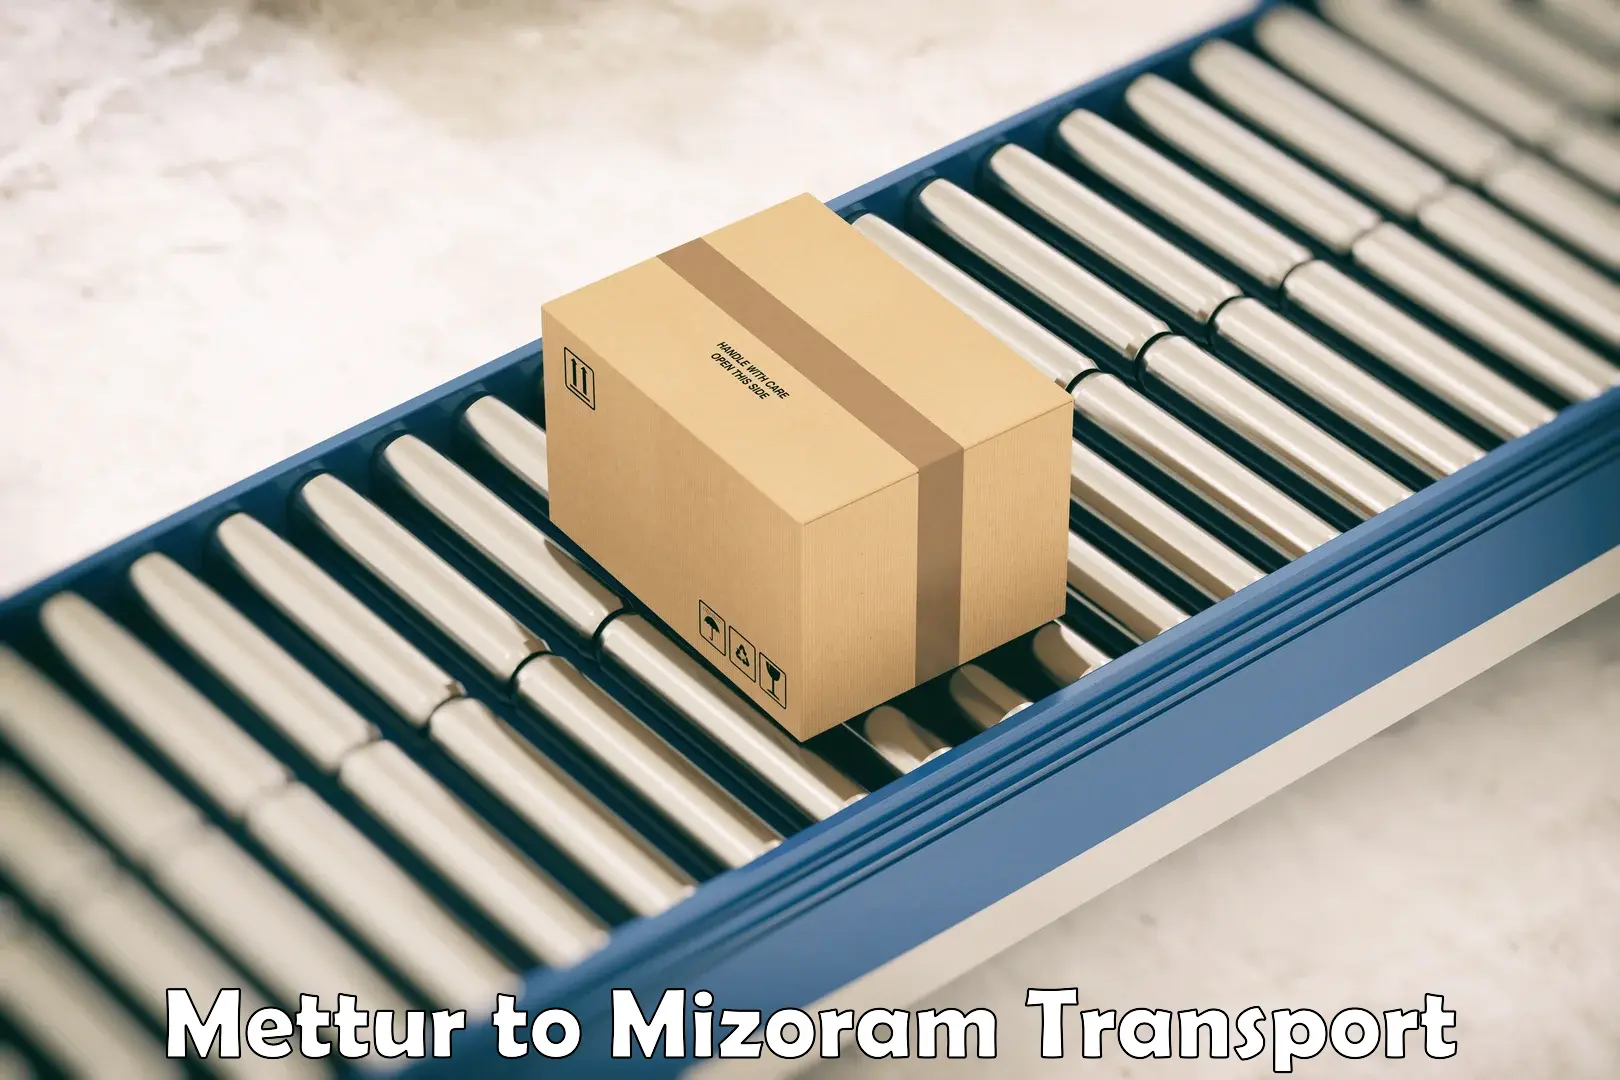 Transport bike from one state to another Mettur to Mizoram